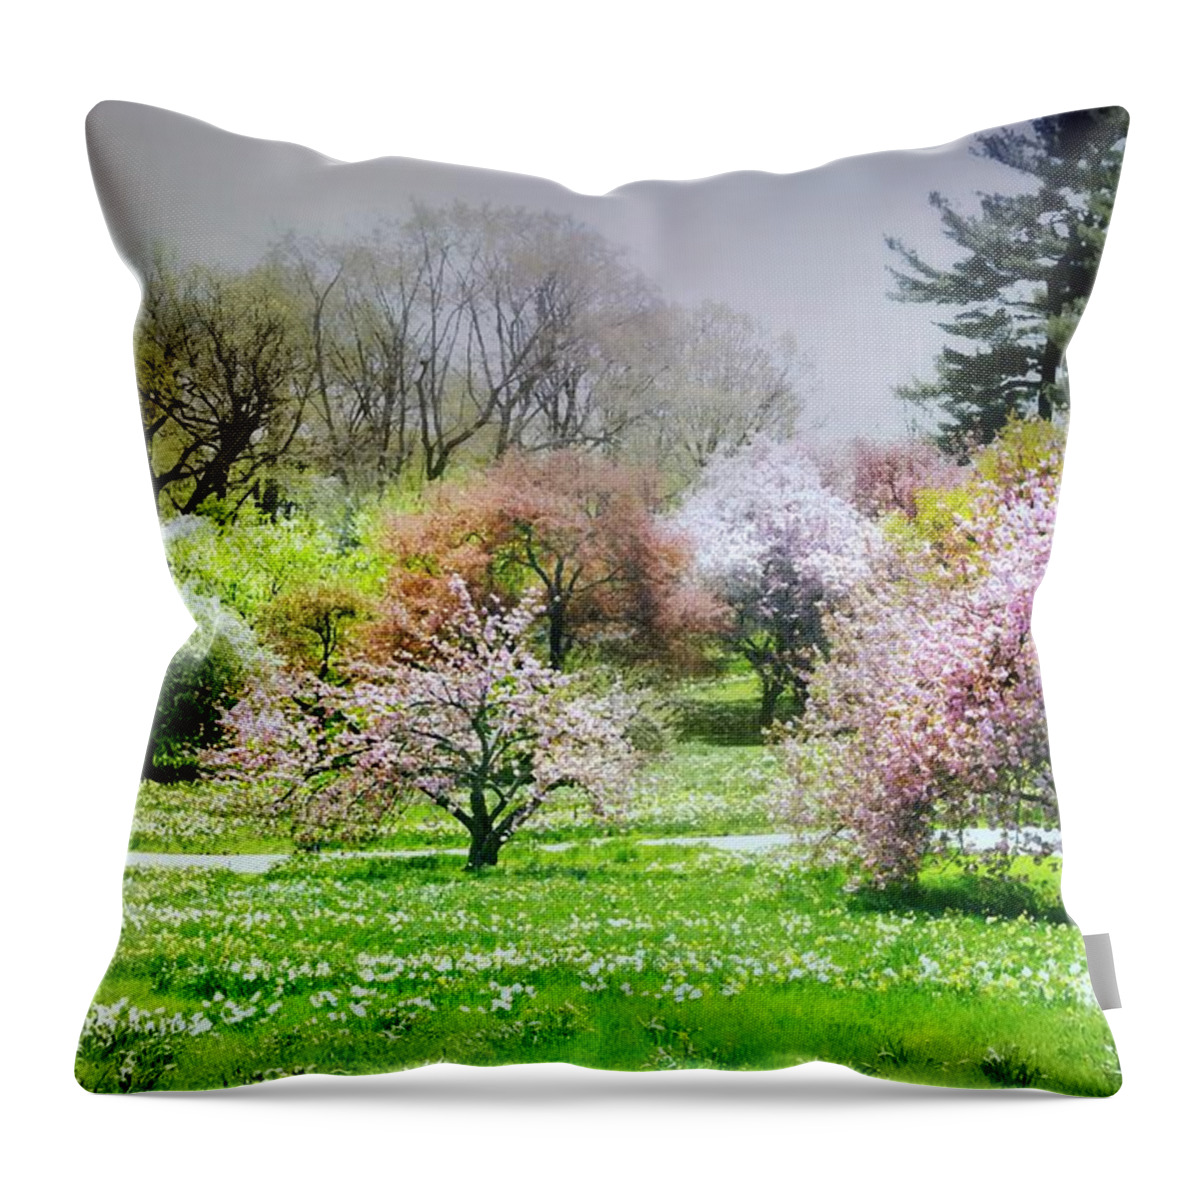 Nybg Throw Pillow featuring the photograph Garden Canvas by Diana Angstadt